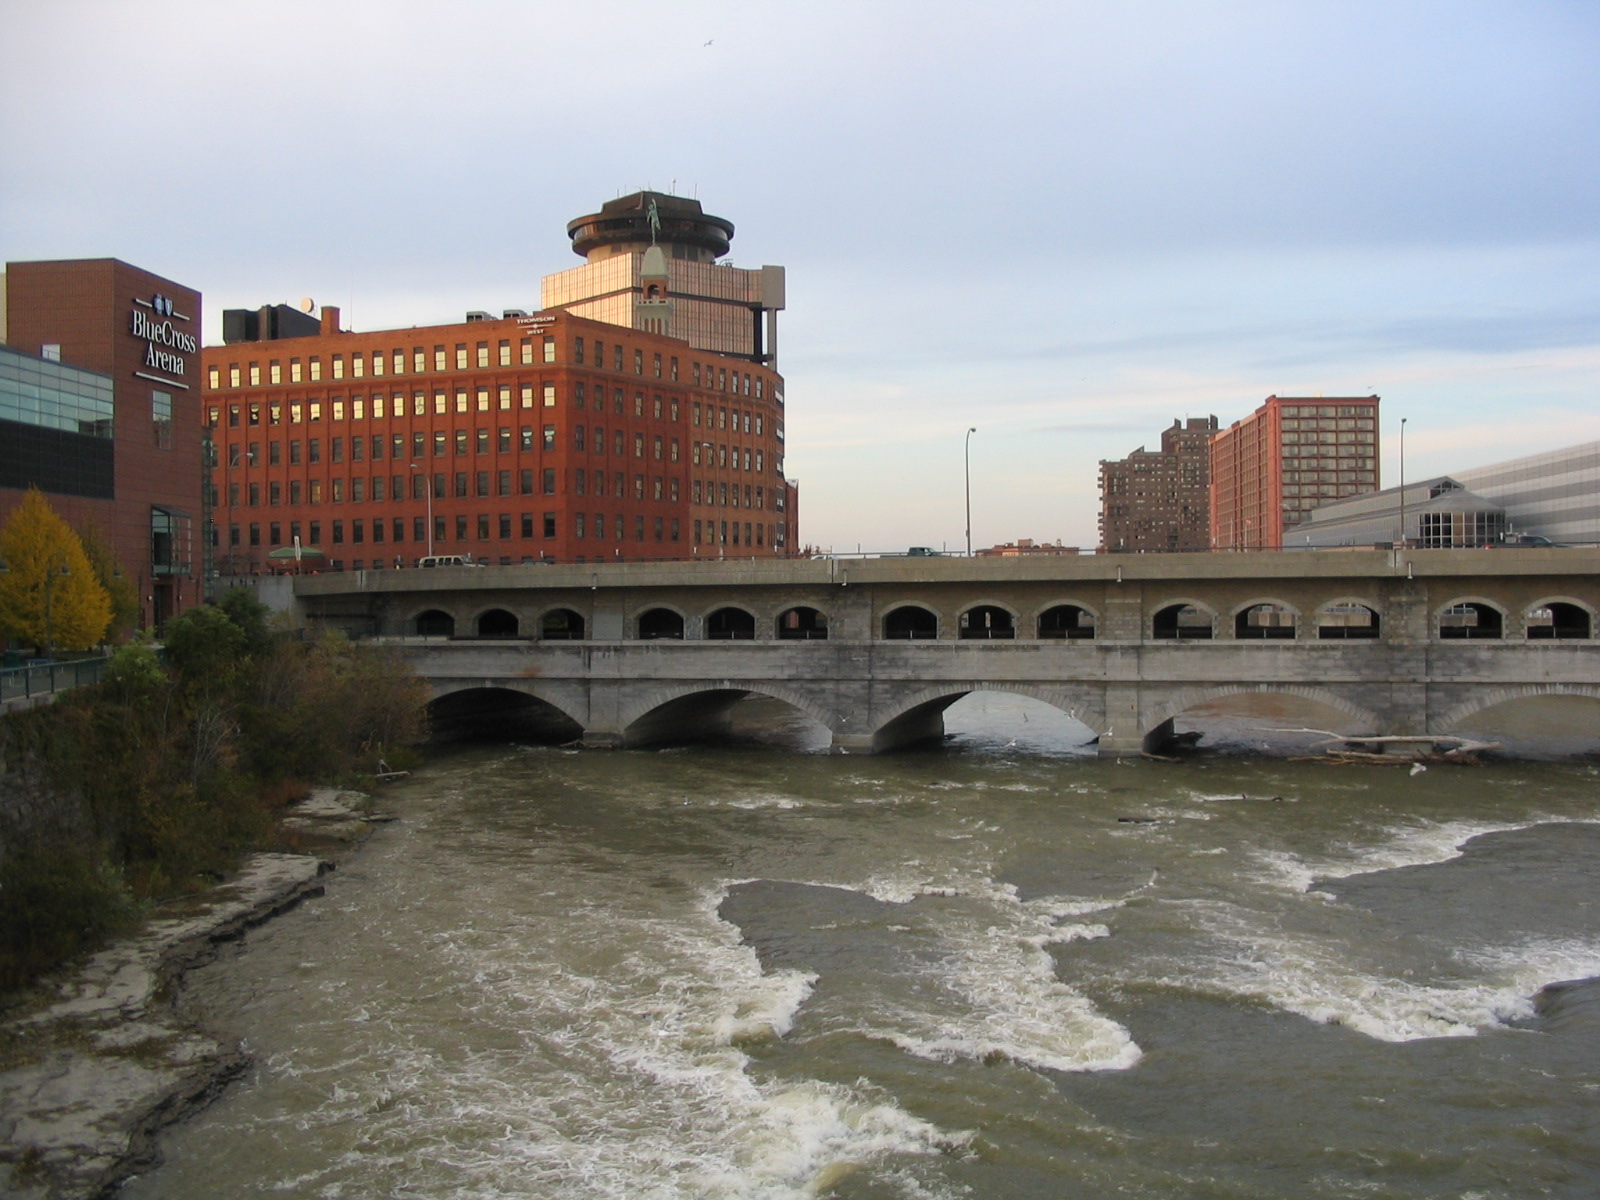 Photograph of the Genesee River at Rochester, NY (RHRN6)